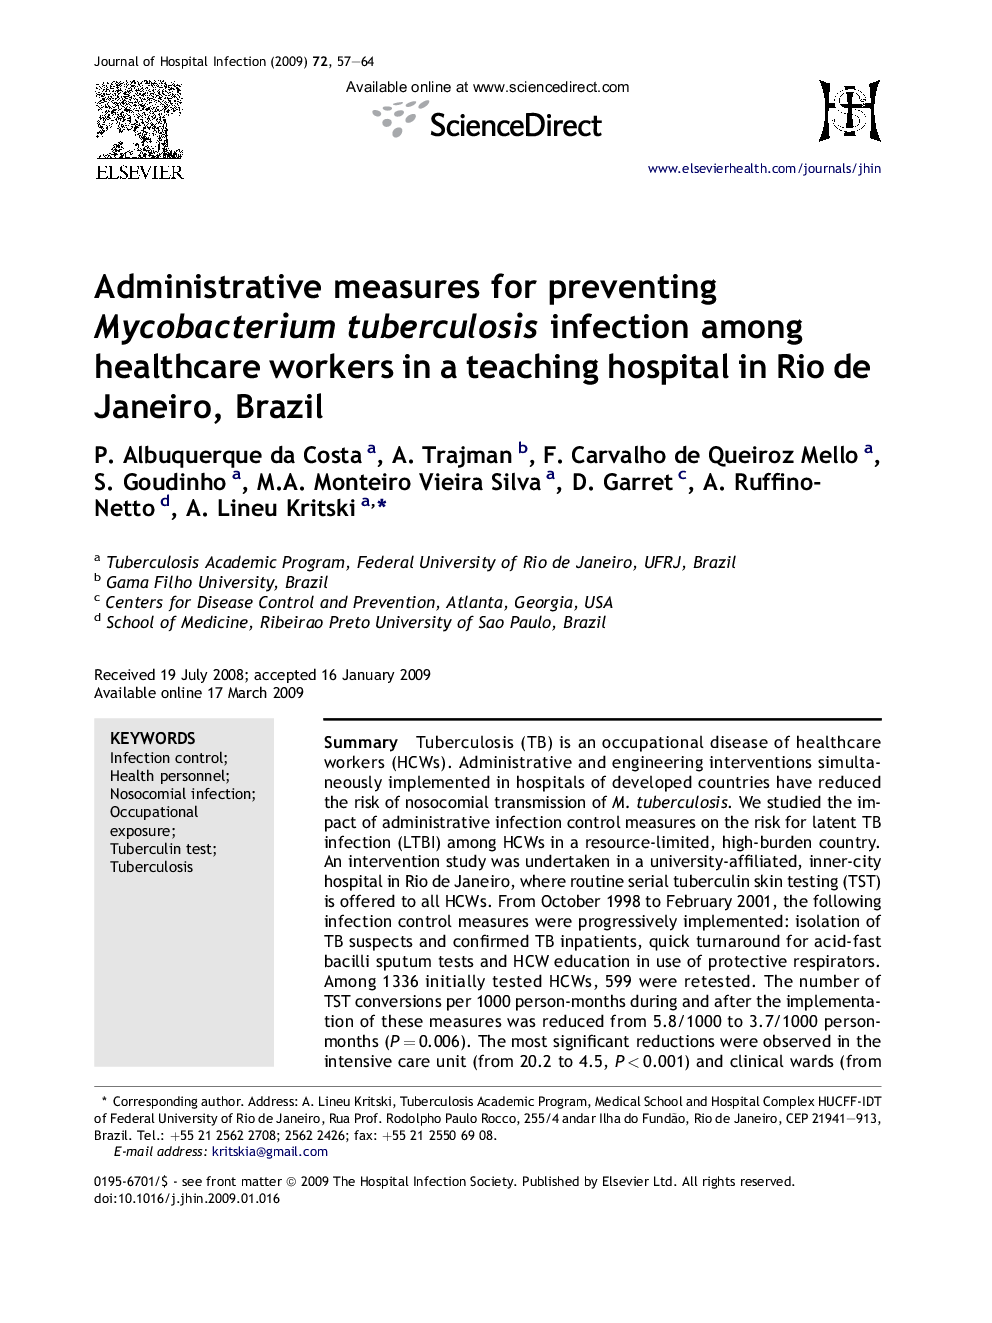 Administrative measures for preventing Mycobacterium tuberculosis infection among healthcare workers in a teaching hospital in Rio de Janeiro, Brazil